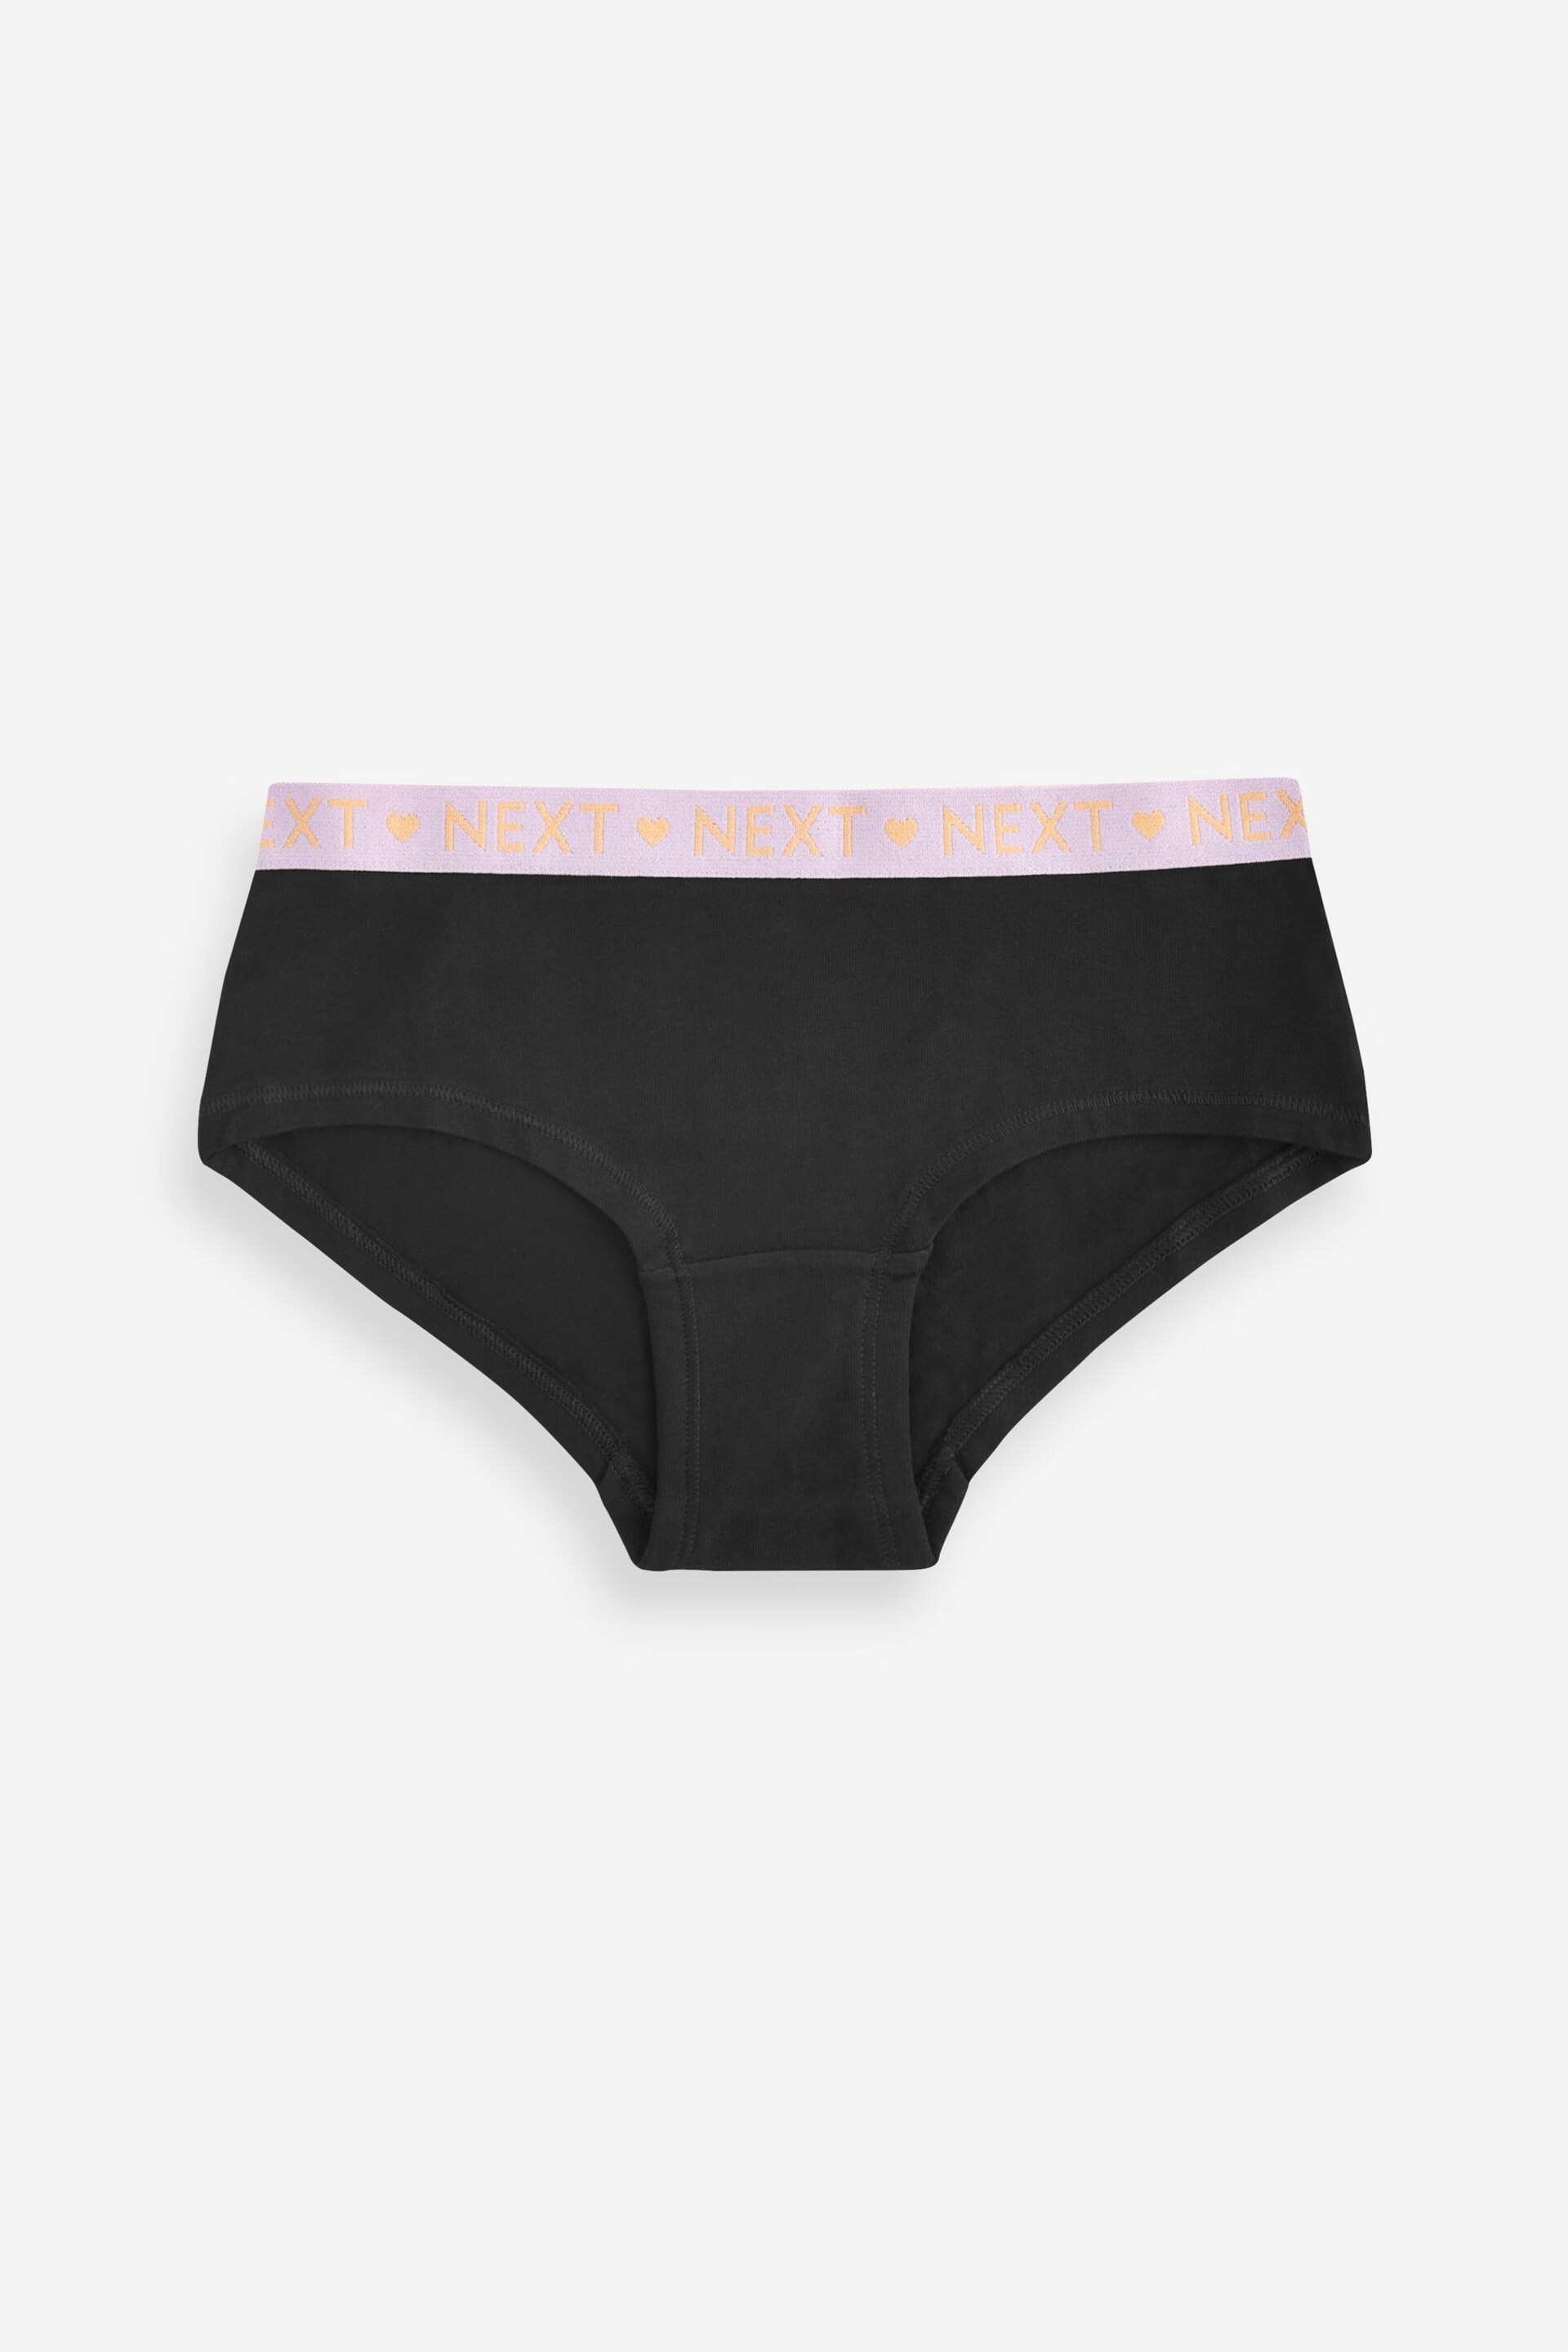 Black Bright Waistband Hipster 10 Pack (2-16yrs) - Image 9 of 12